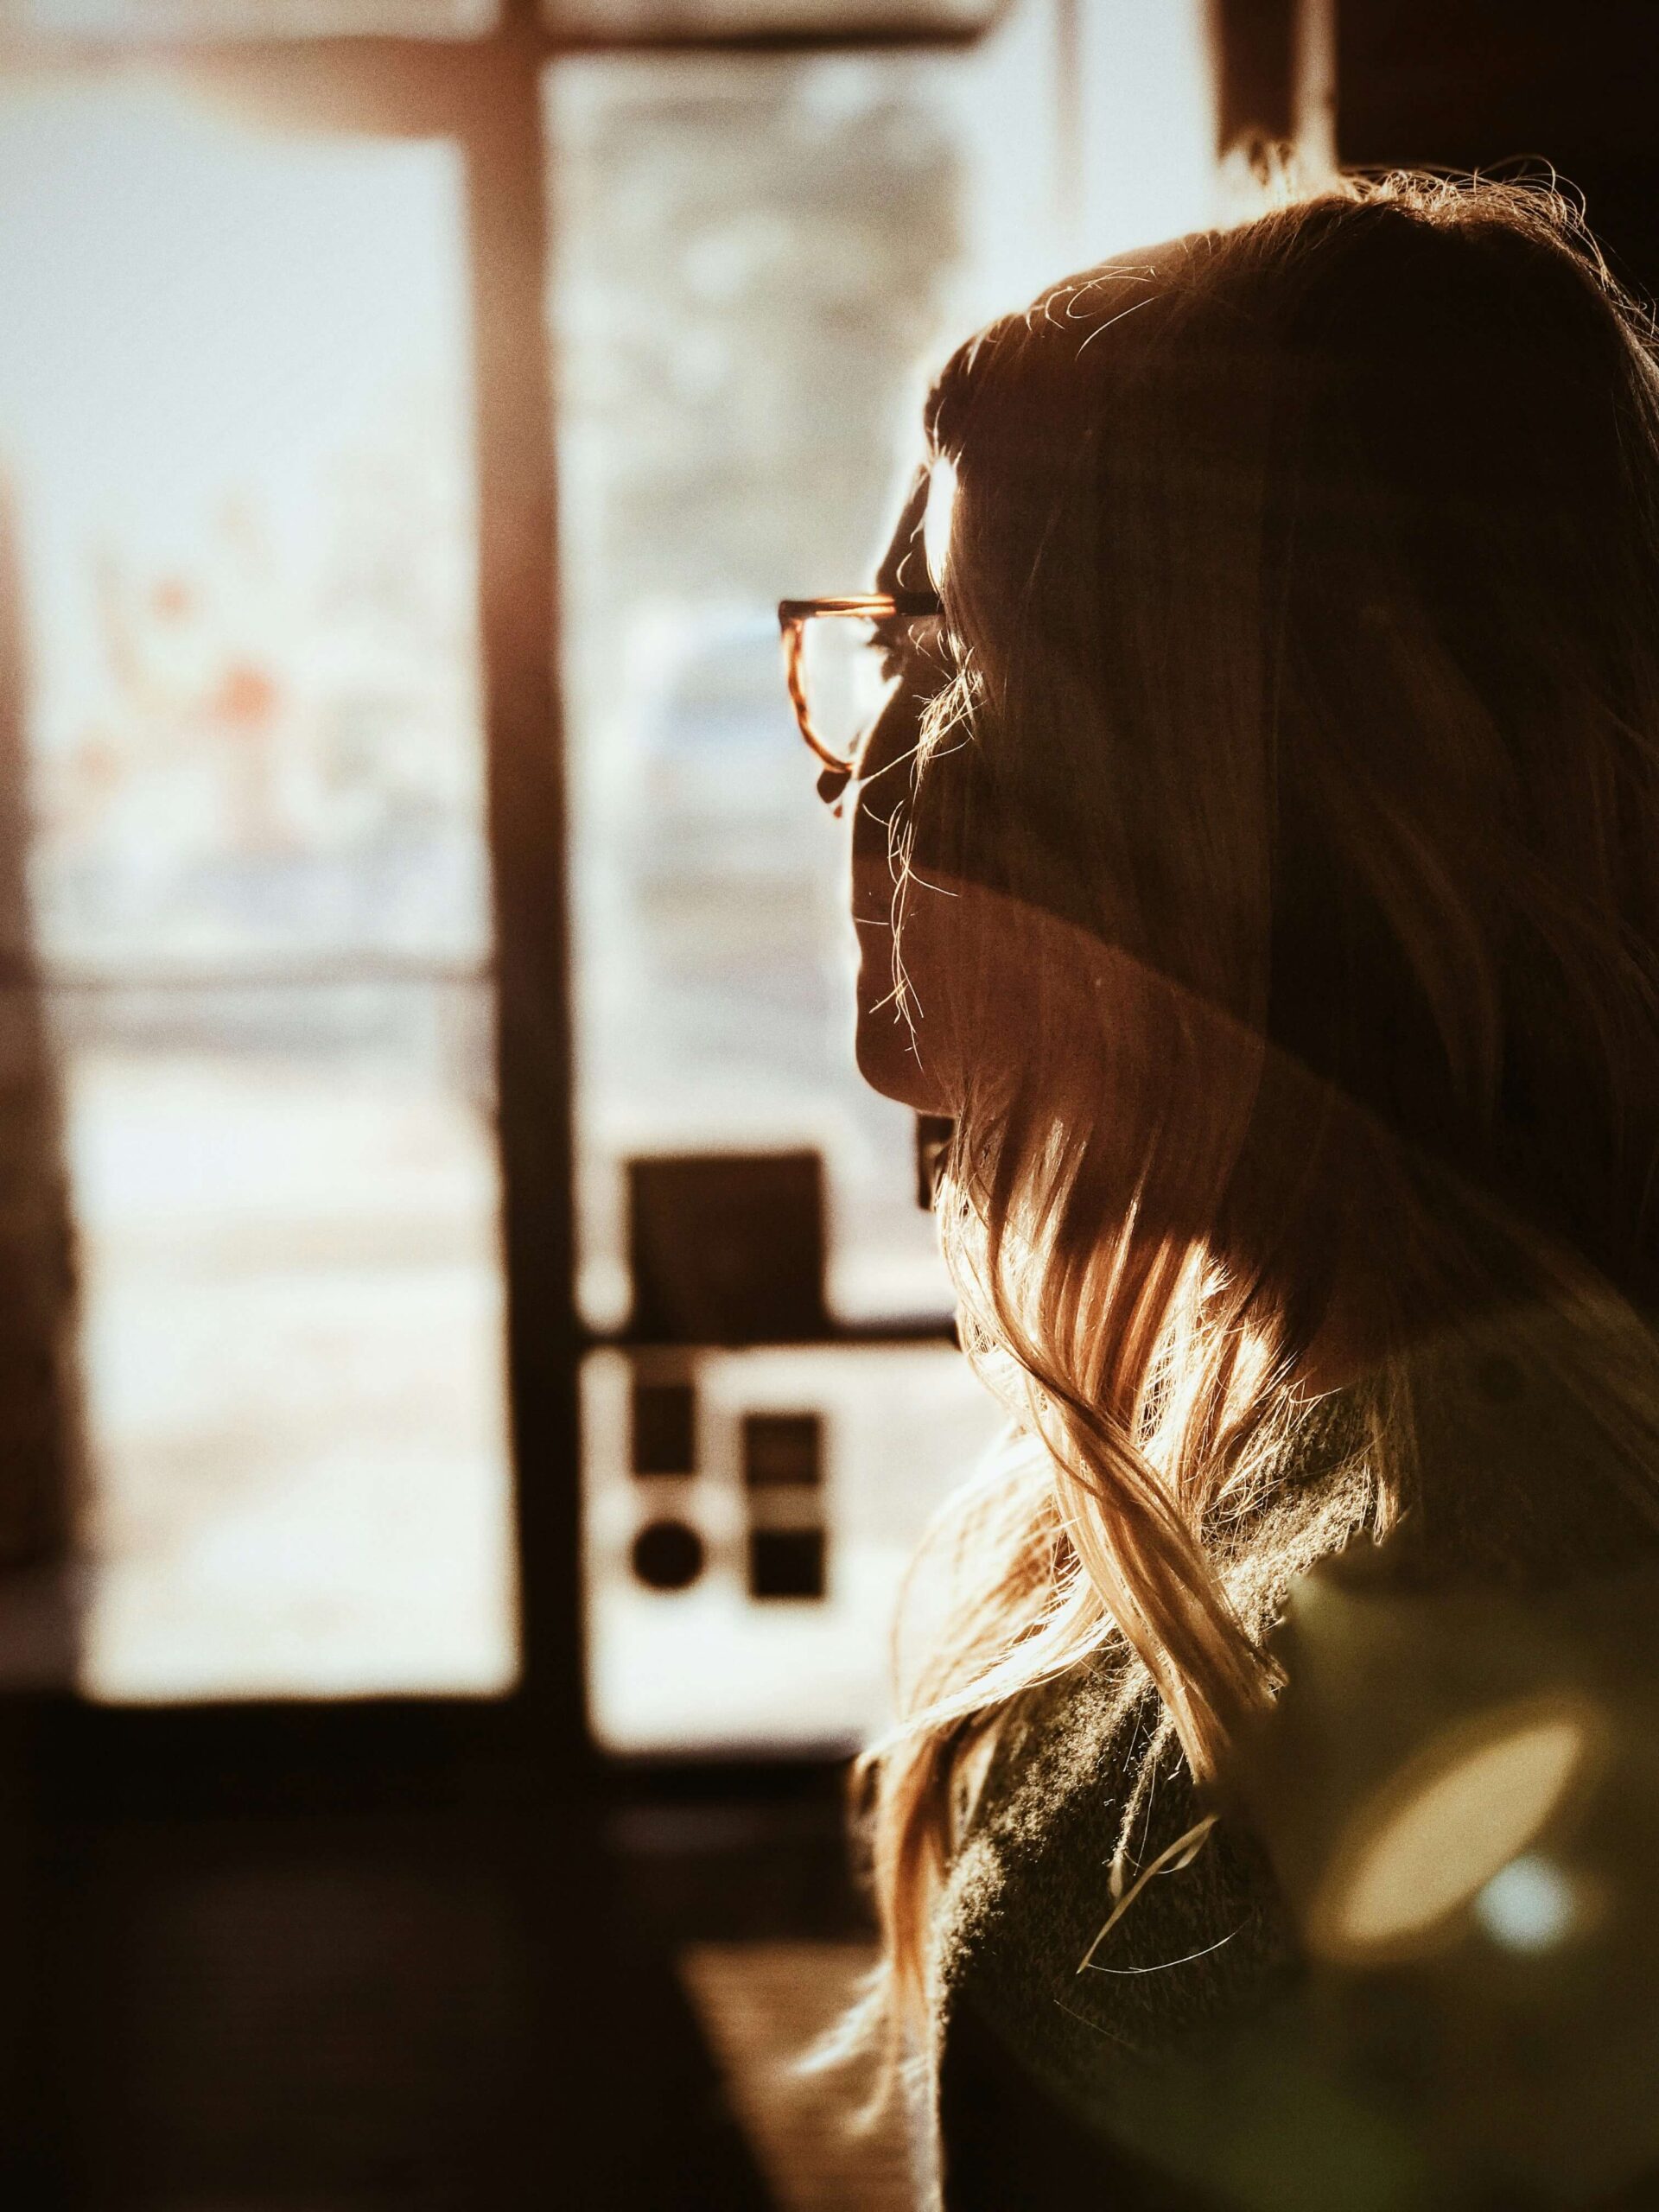 Image of a woman staring out a window while the sun shines on her face. If you struggle with memory loss due to trauma learn how trauma therapy in Saint Petersburg, FL can help.